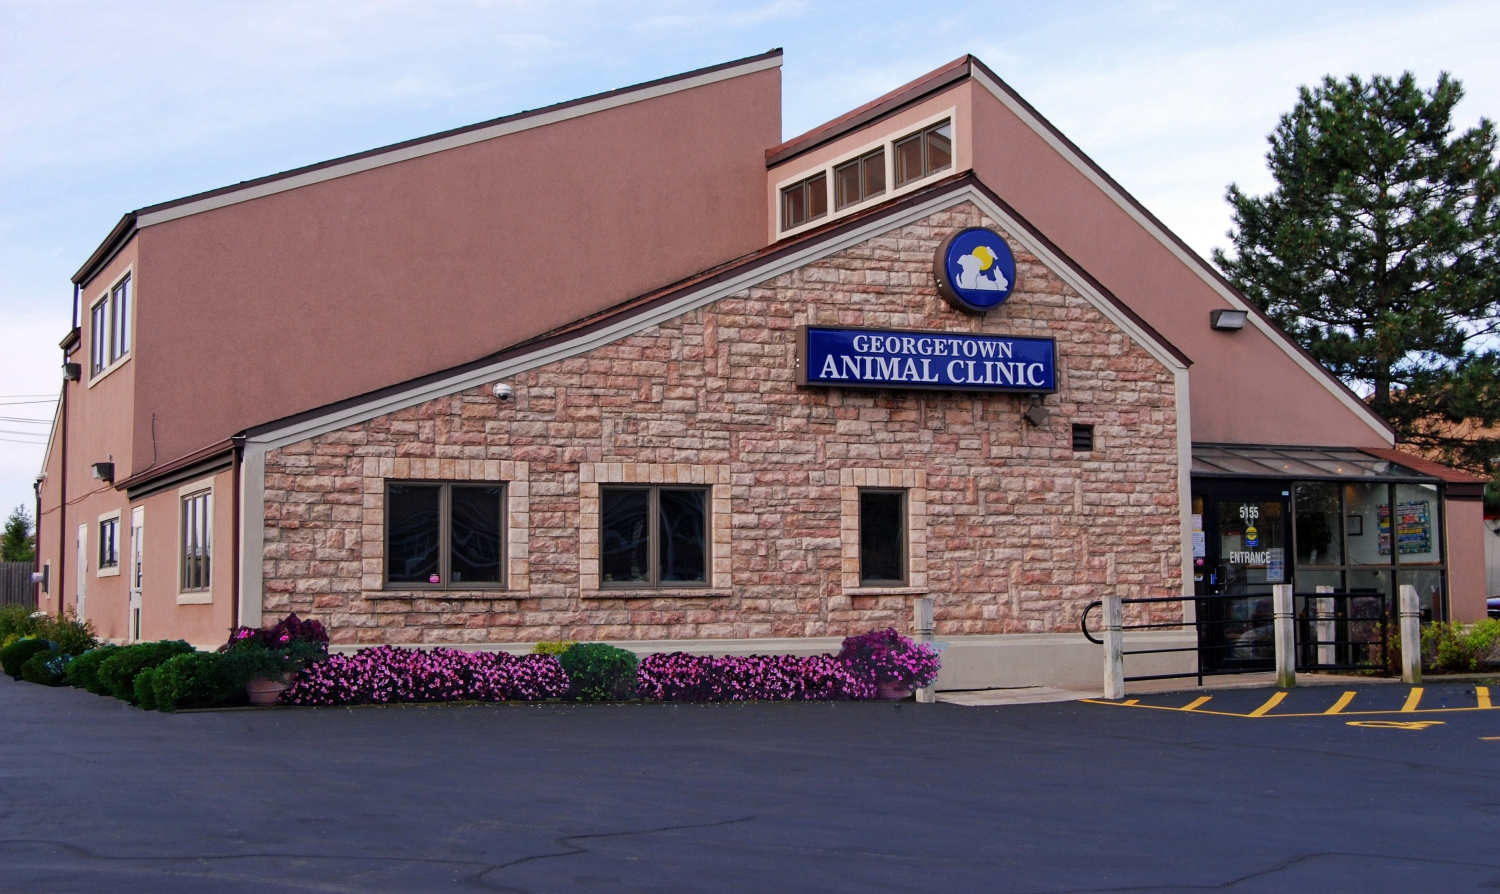 Georgetown Animal Clinic, PC veterinarians serving Williamsville, Amherst, and Buffalo NY areas: Our Facility if clean and efficient